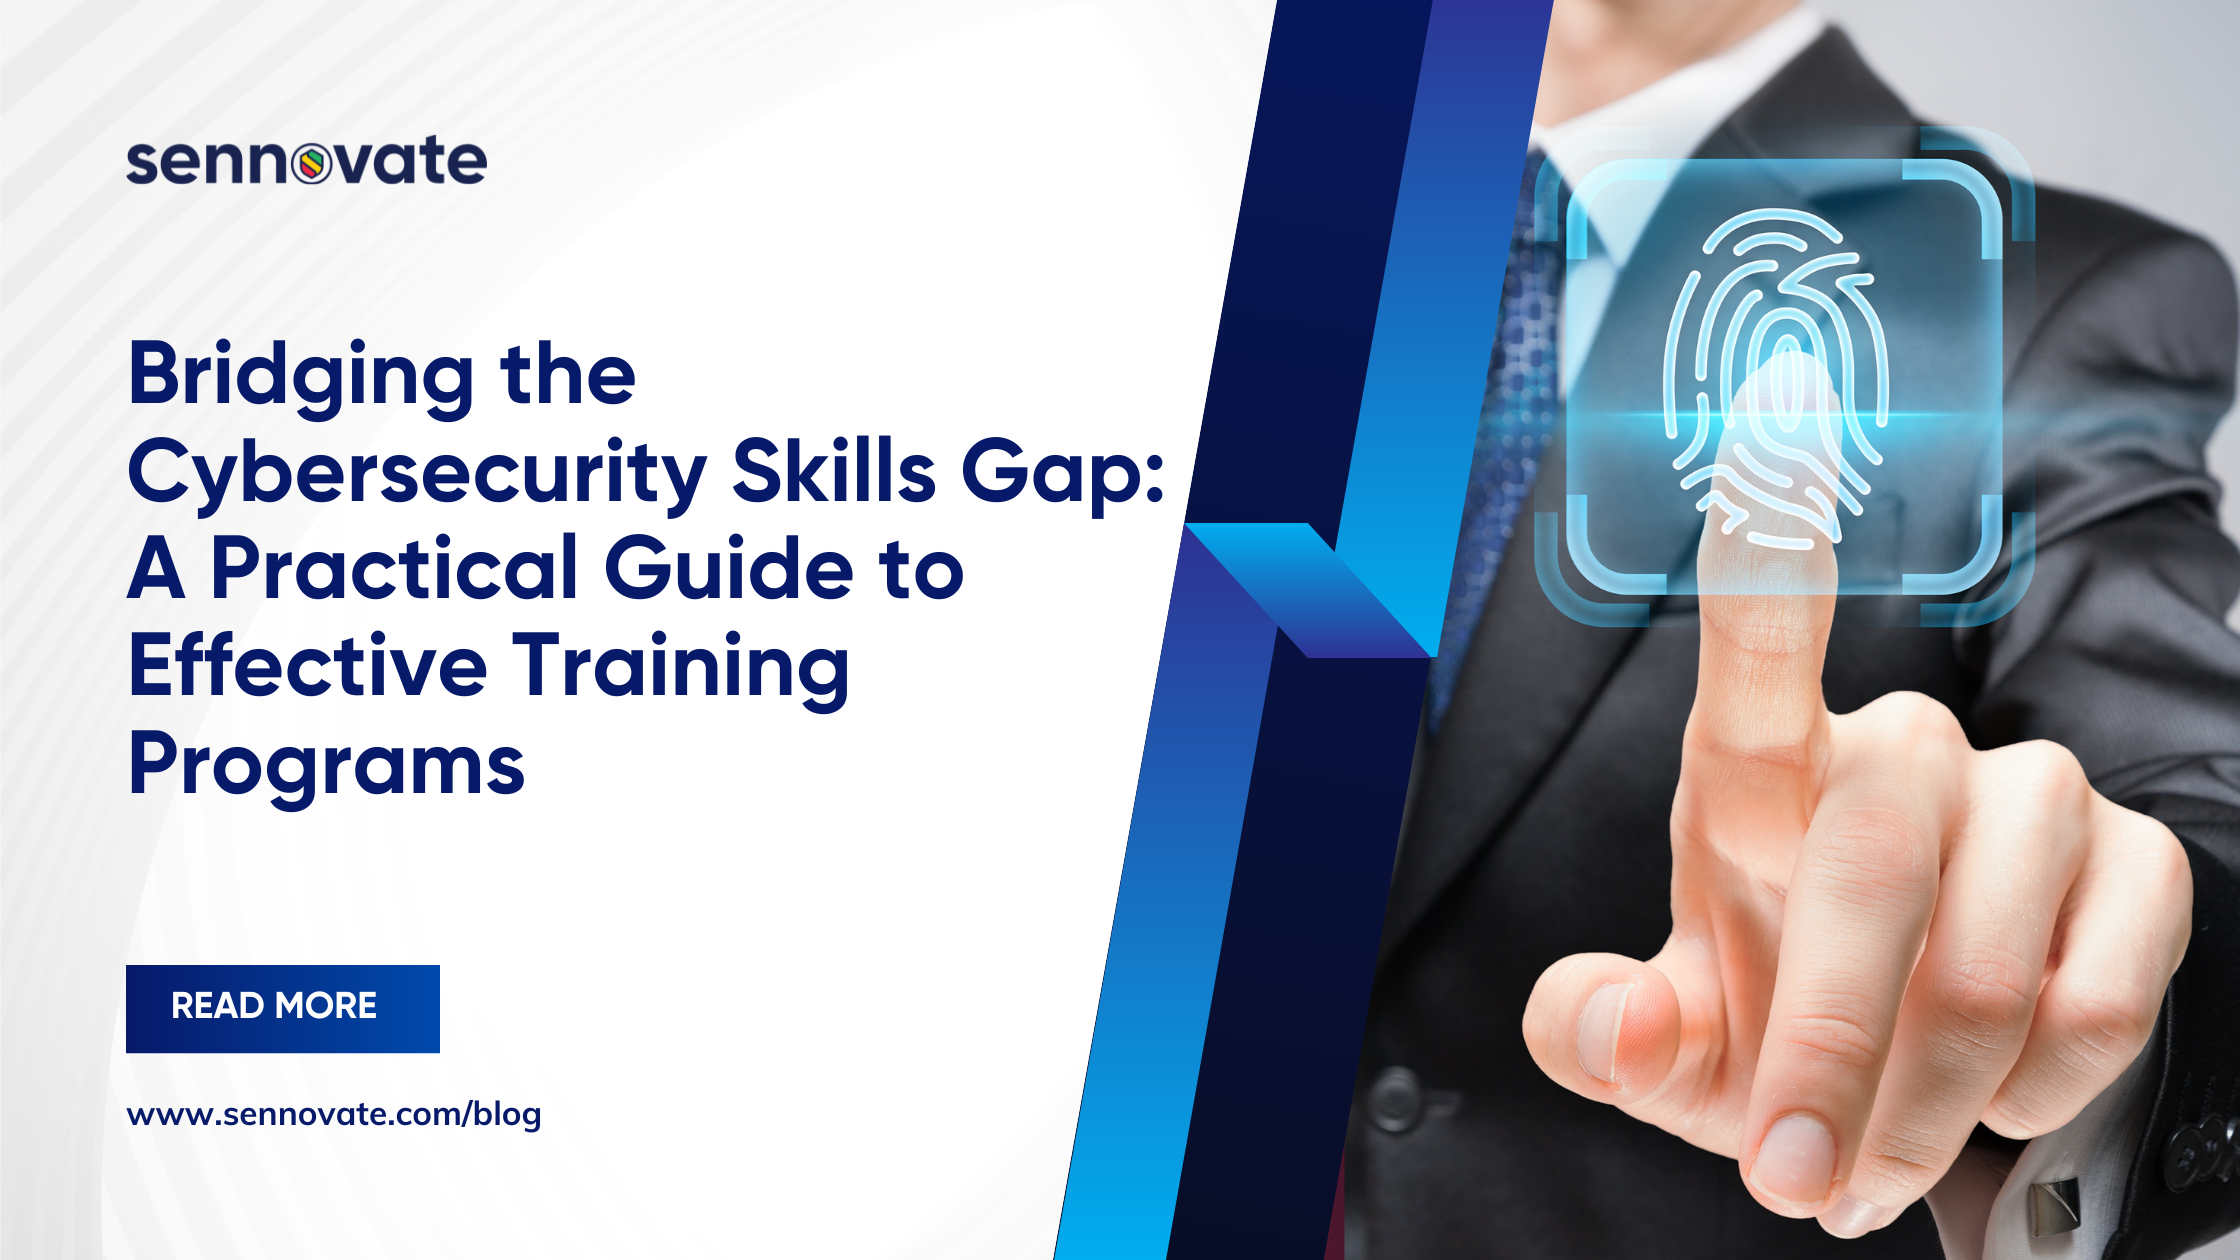 Cybersecurity Training and cybersecurity skills gap issue